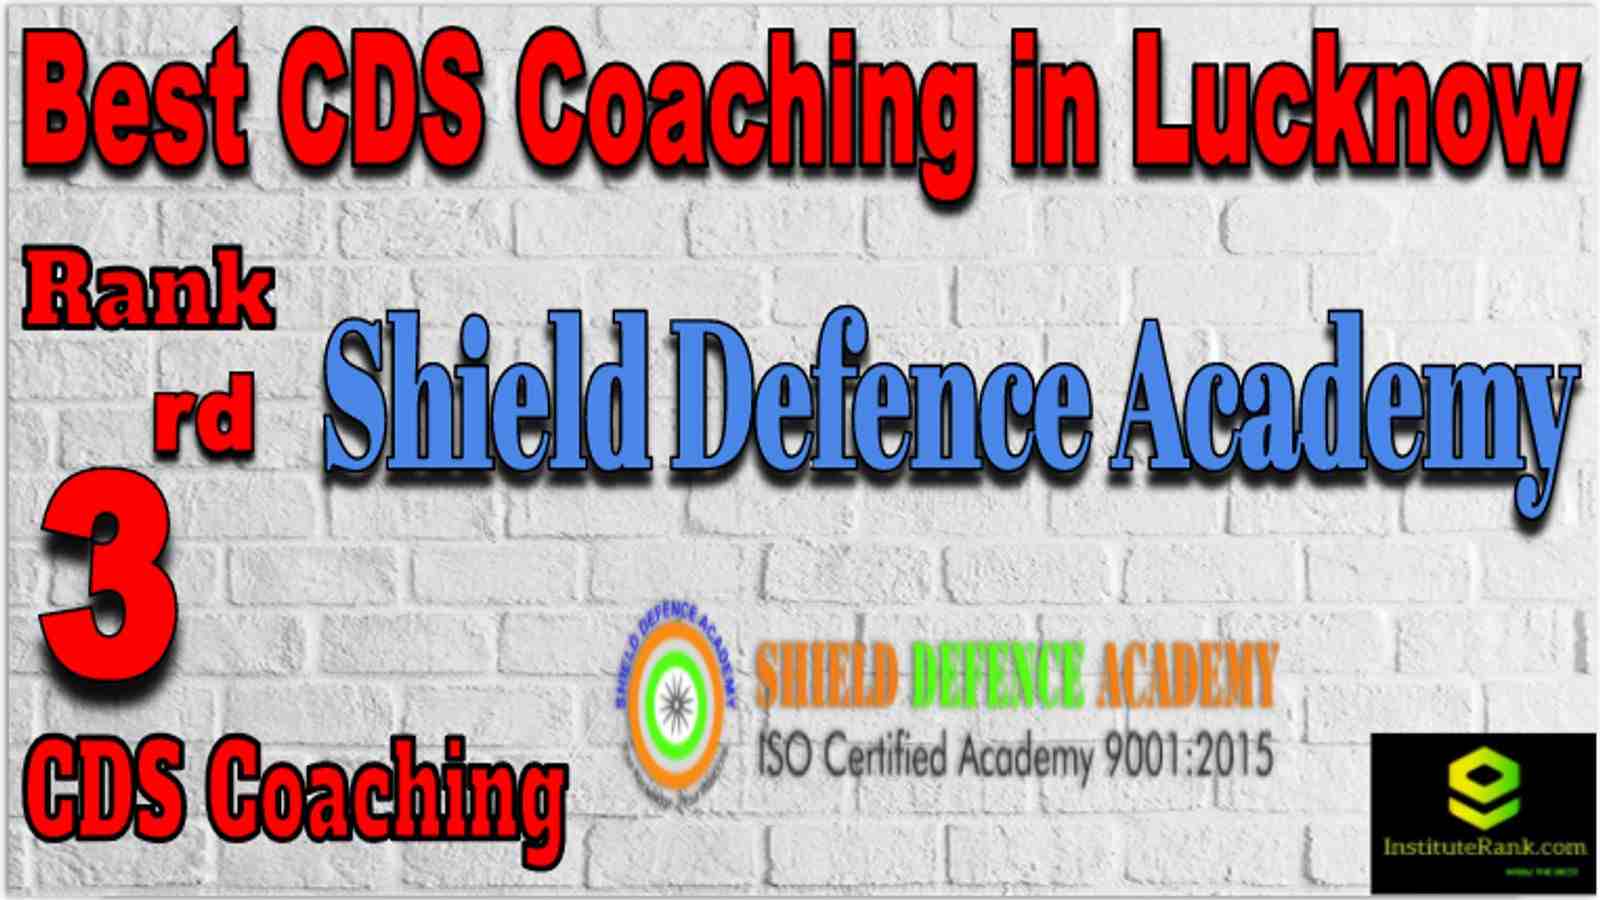 Rank 3 Top CDS Coaching in Lucknow